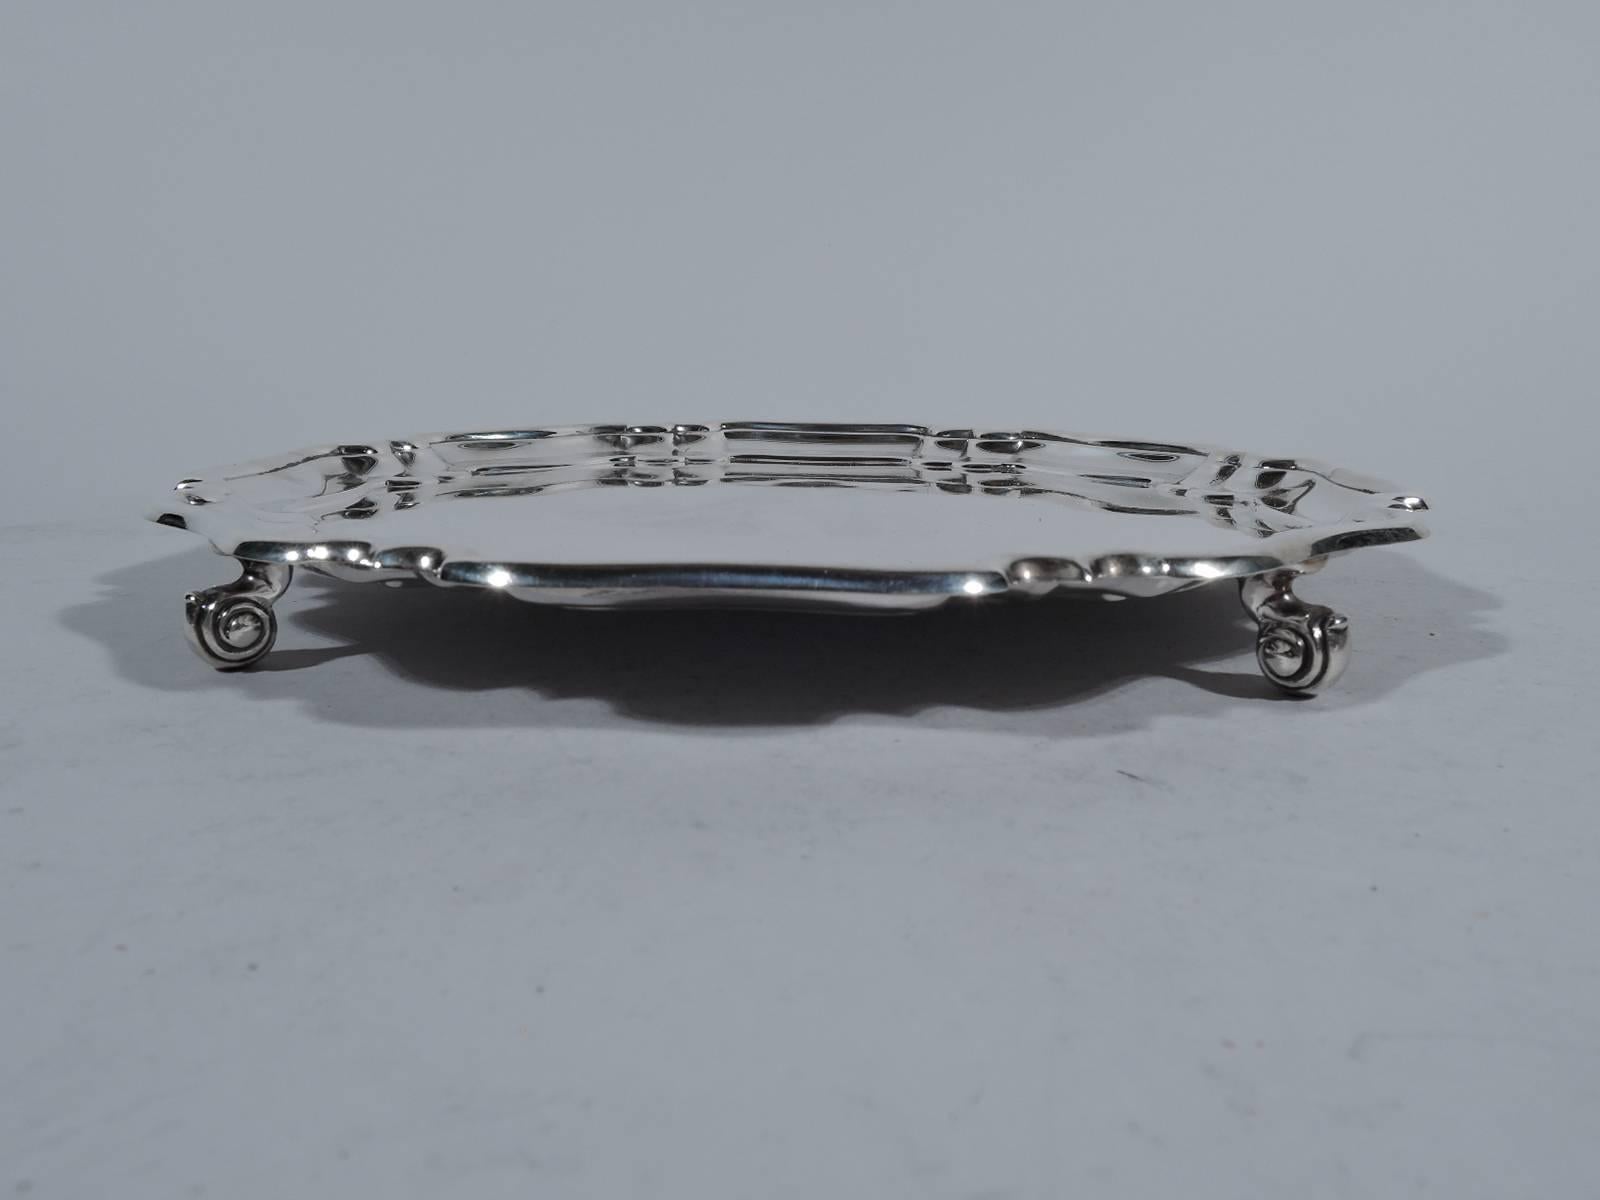 Georgian-style sterling silver salver. Made by Atkin Brothers in Sheffield in 1955. Circular with molded piecrust rim comprising alternating double C-scrolls and single wide scroll. Rests on four volute scrolls. Fully hallmarked including